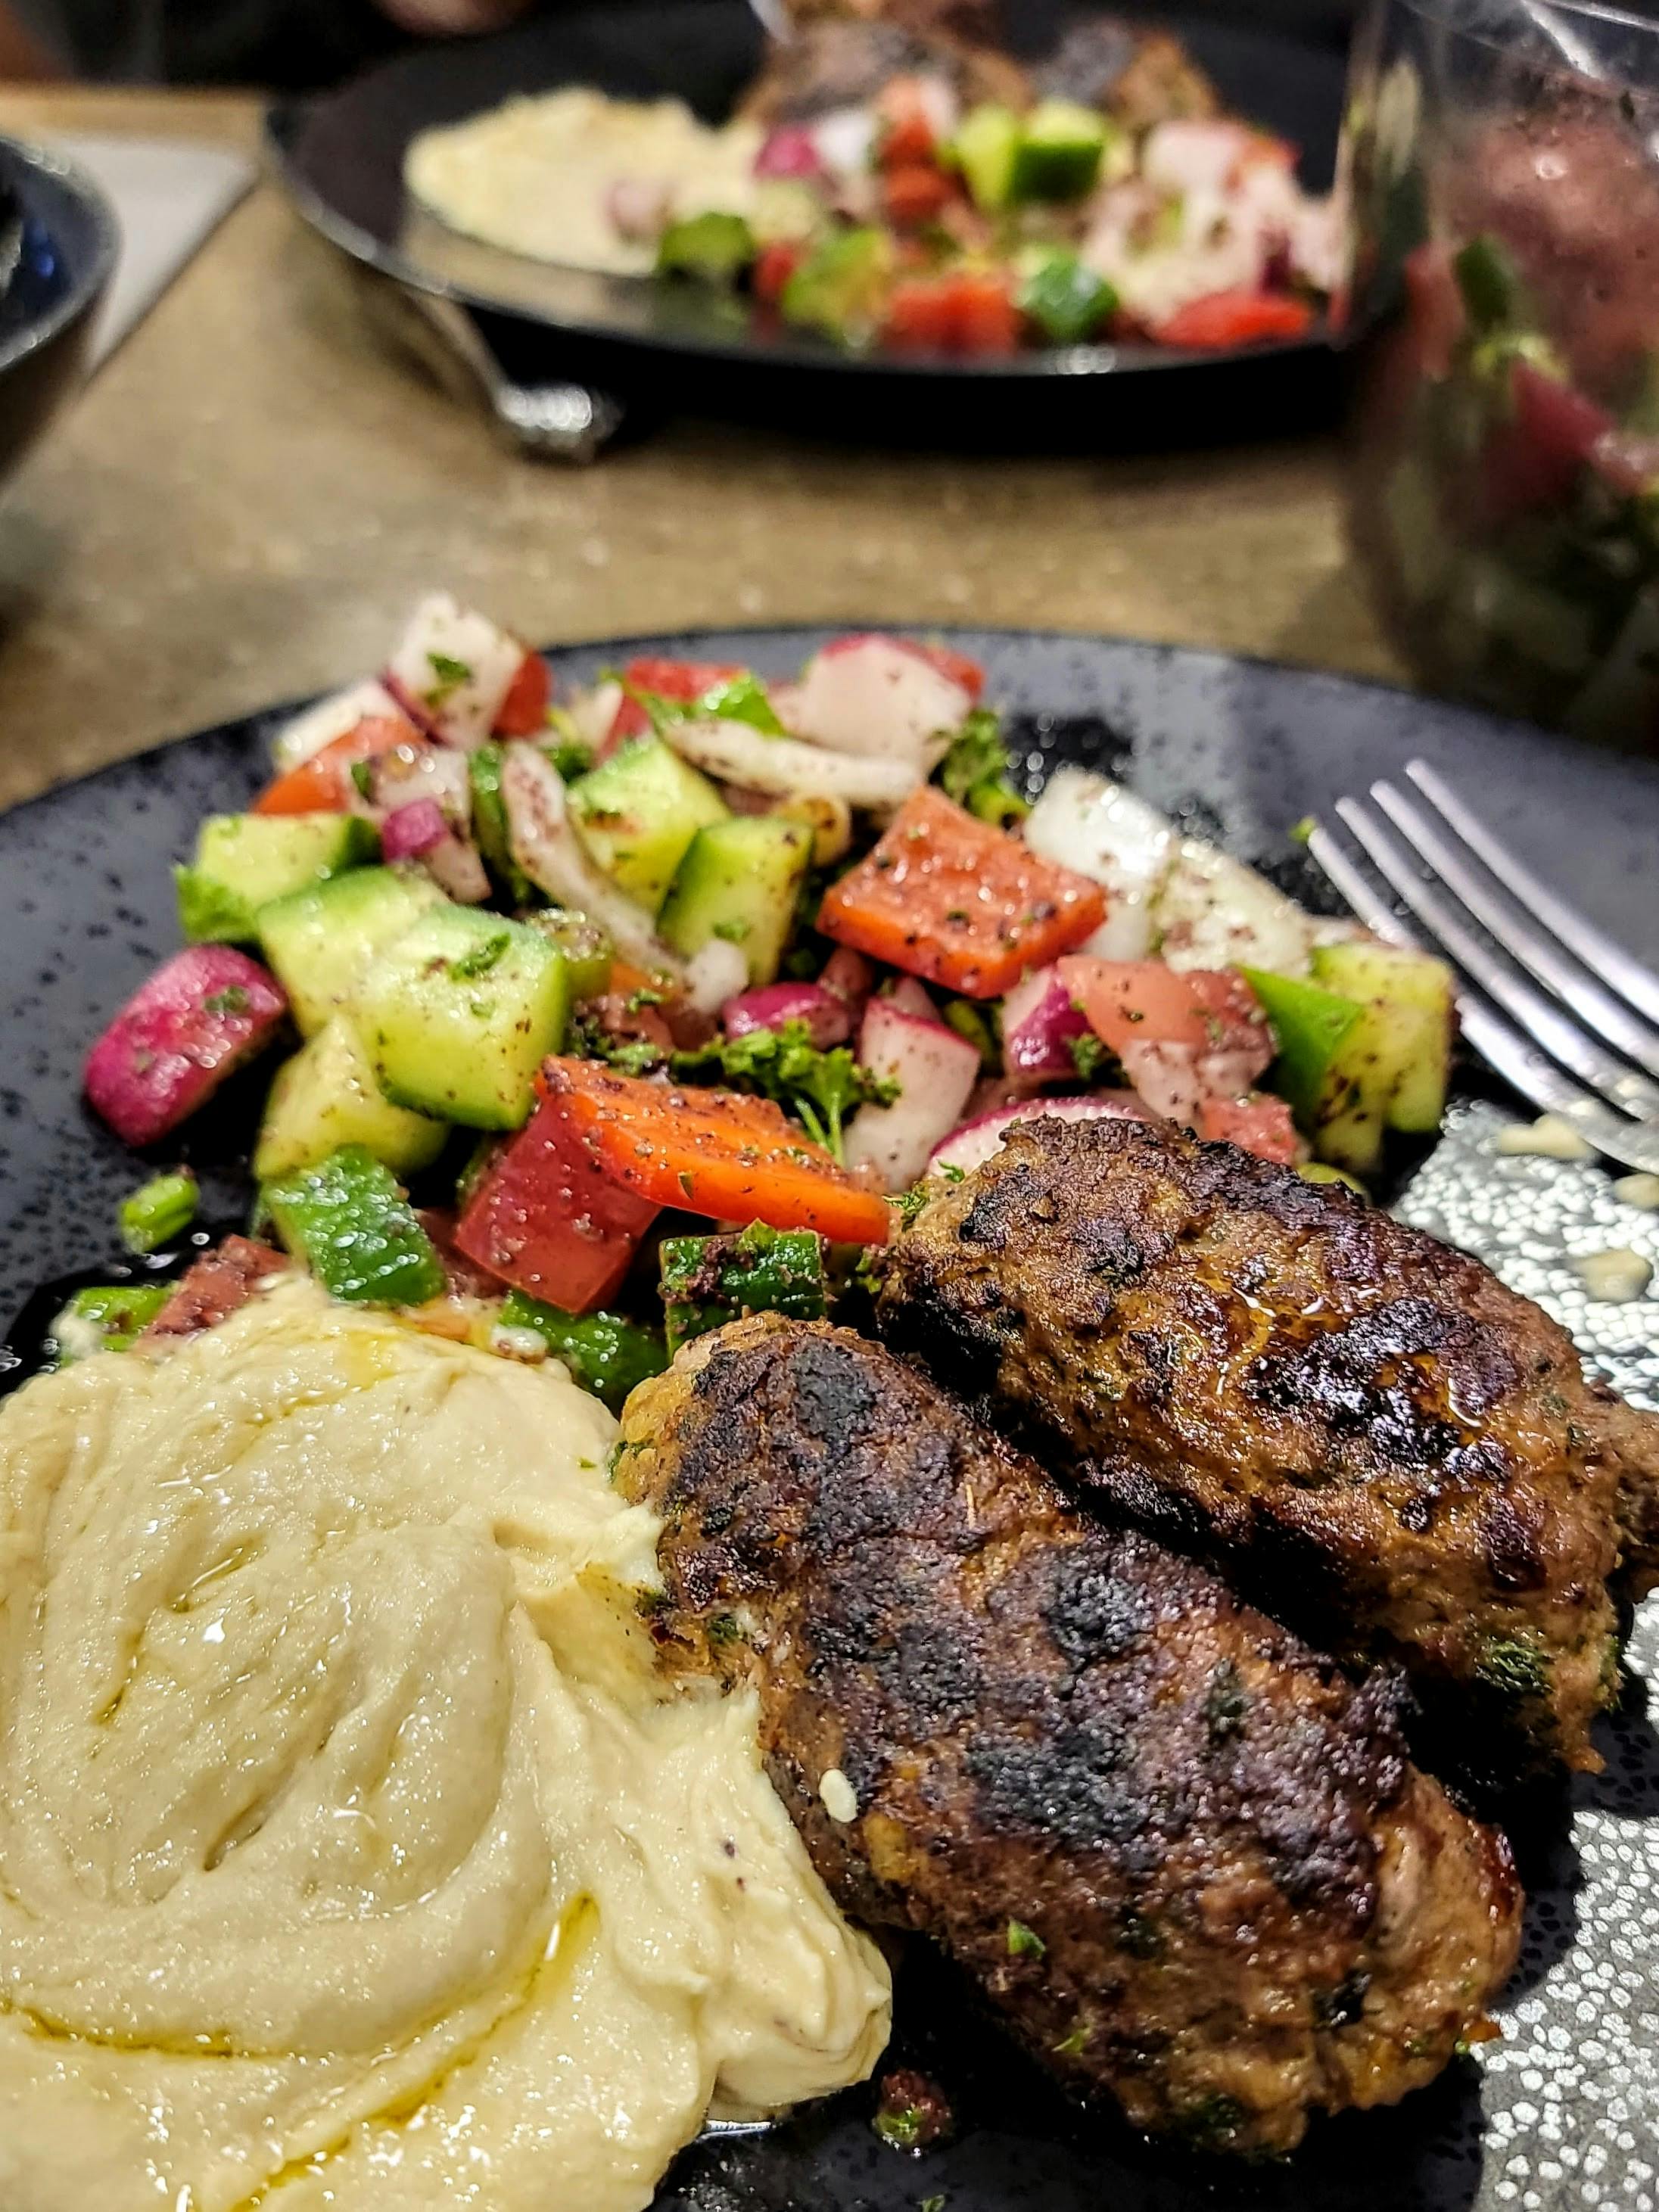 ANNE AND BRIAN KLUMPP's meal of kabobs, hummus and fattoush 
